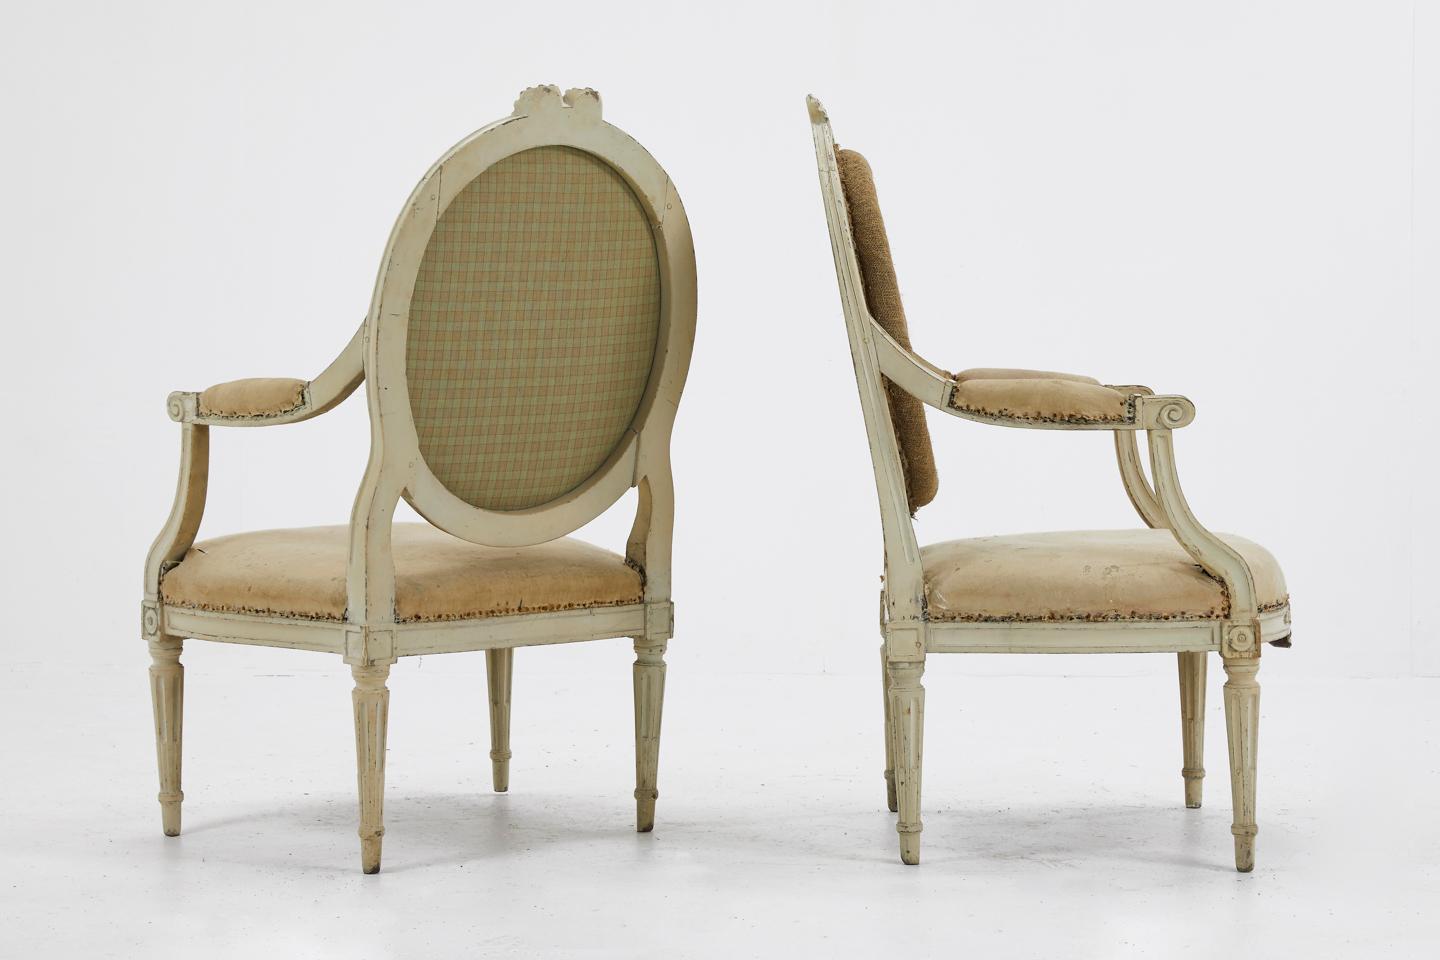 Hand-Painted Pair of French Painted 18th Century Armchairs